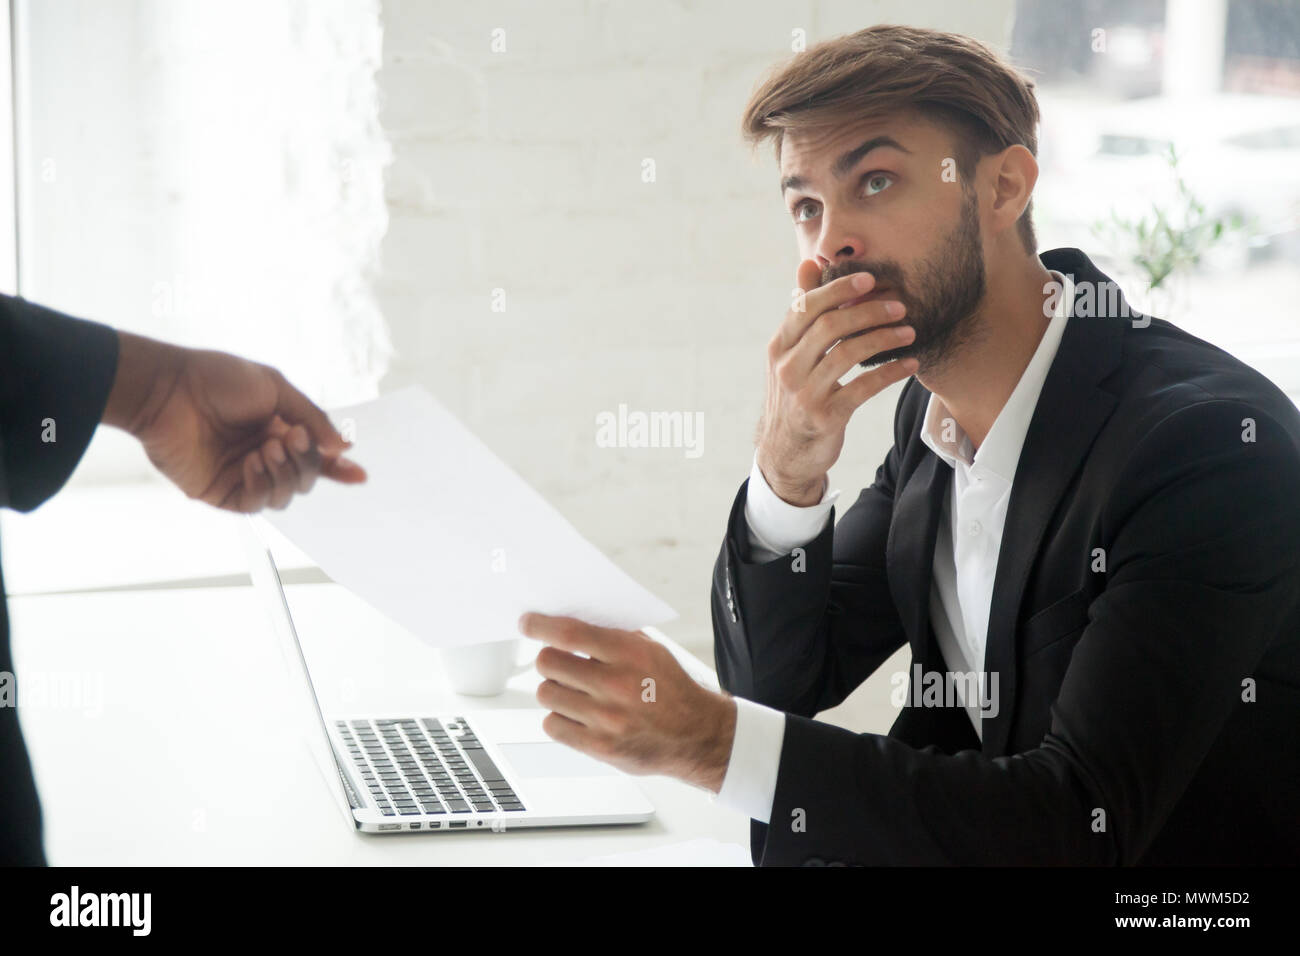 Shocked worker getting dismissal notice from black boss Stock Photo